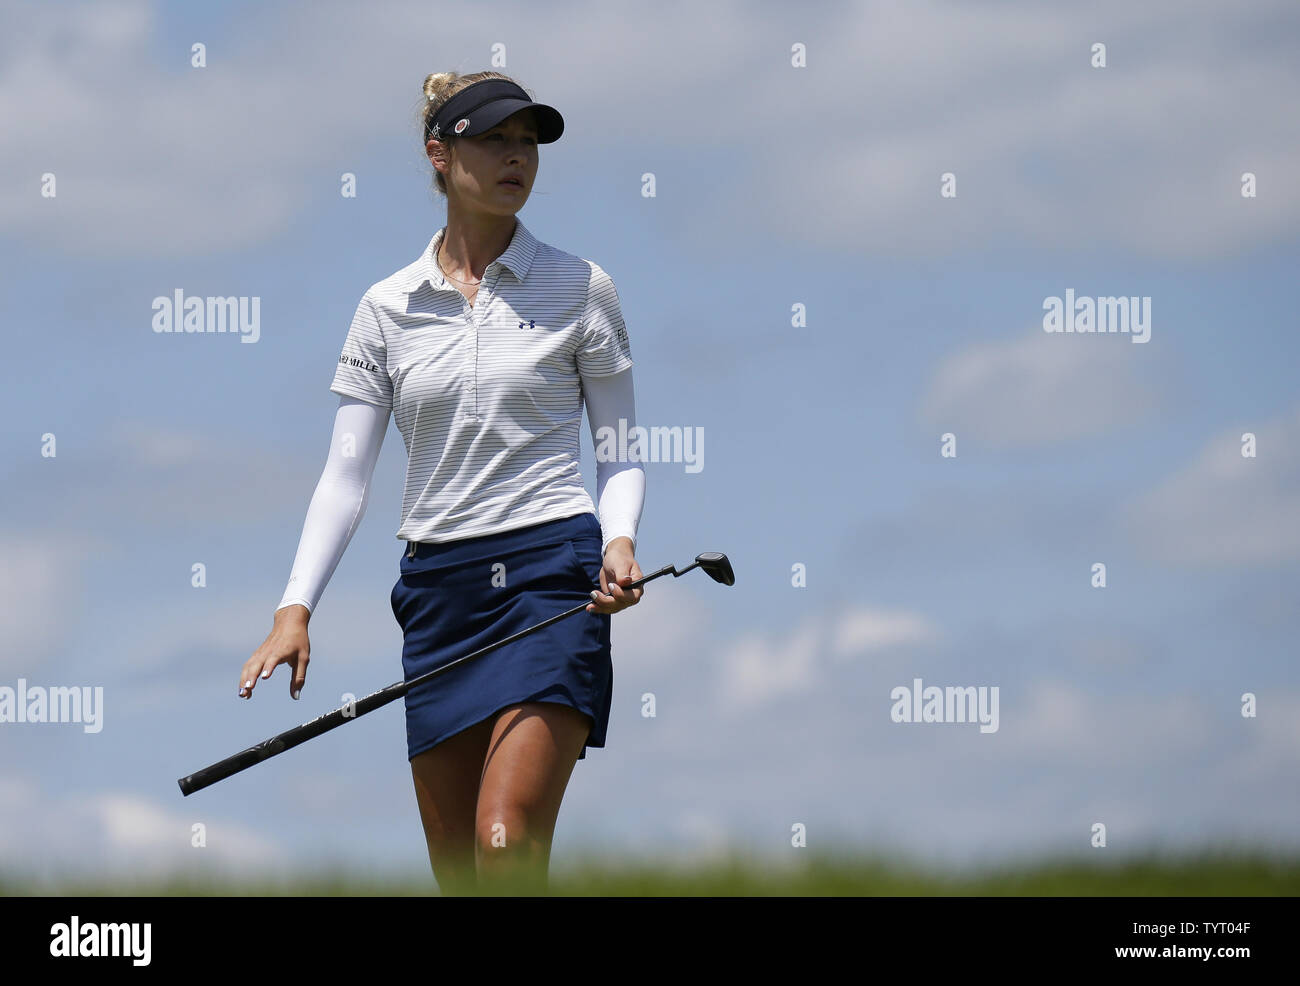 Nelly Korda putts on the 15th green at Trump National Golf Club in the final round of the LPGA U.S. Women's Open Championship  in Bedminster, NJ on July 14, 2017. Sung Hyun Park wins her first major with a score of 11 under par.      Photo by John Angelillo/UPI Stock Photo